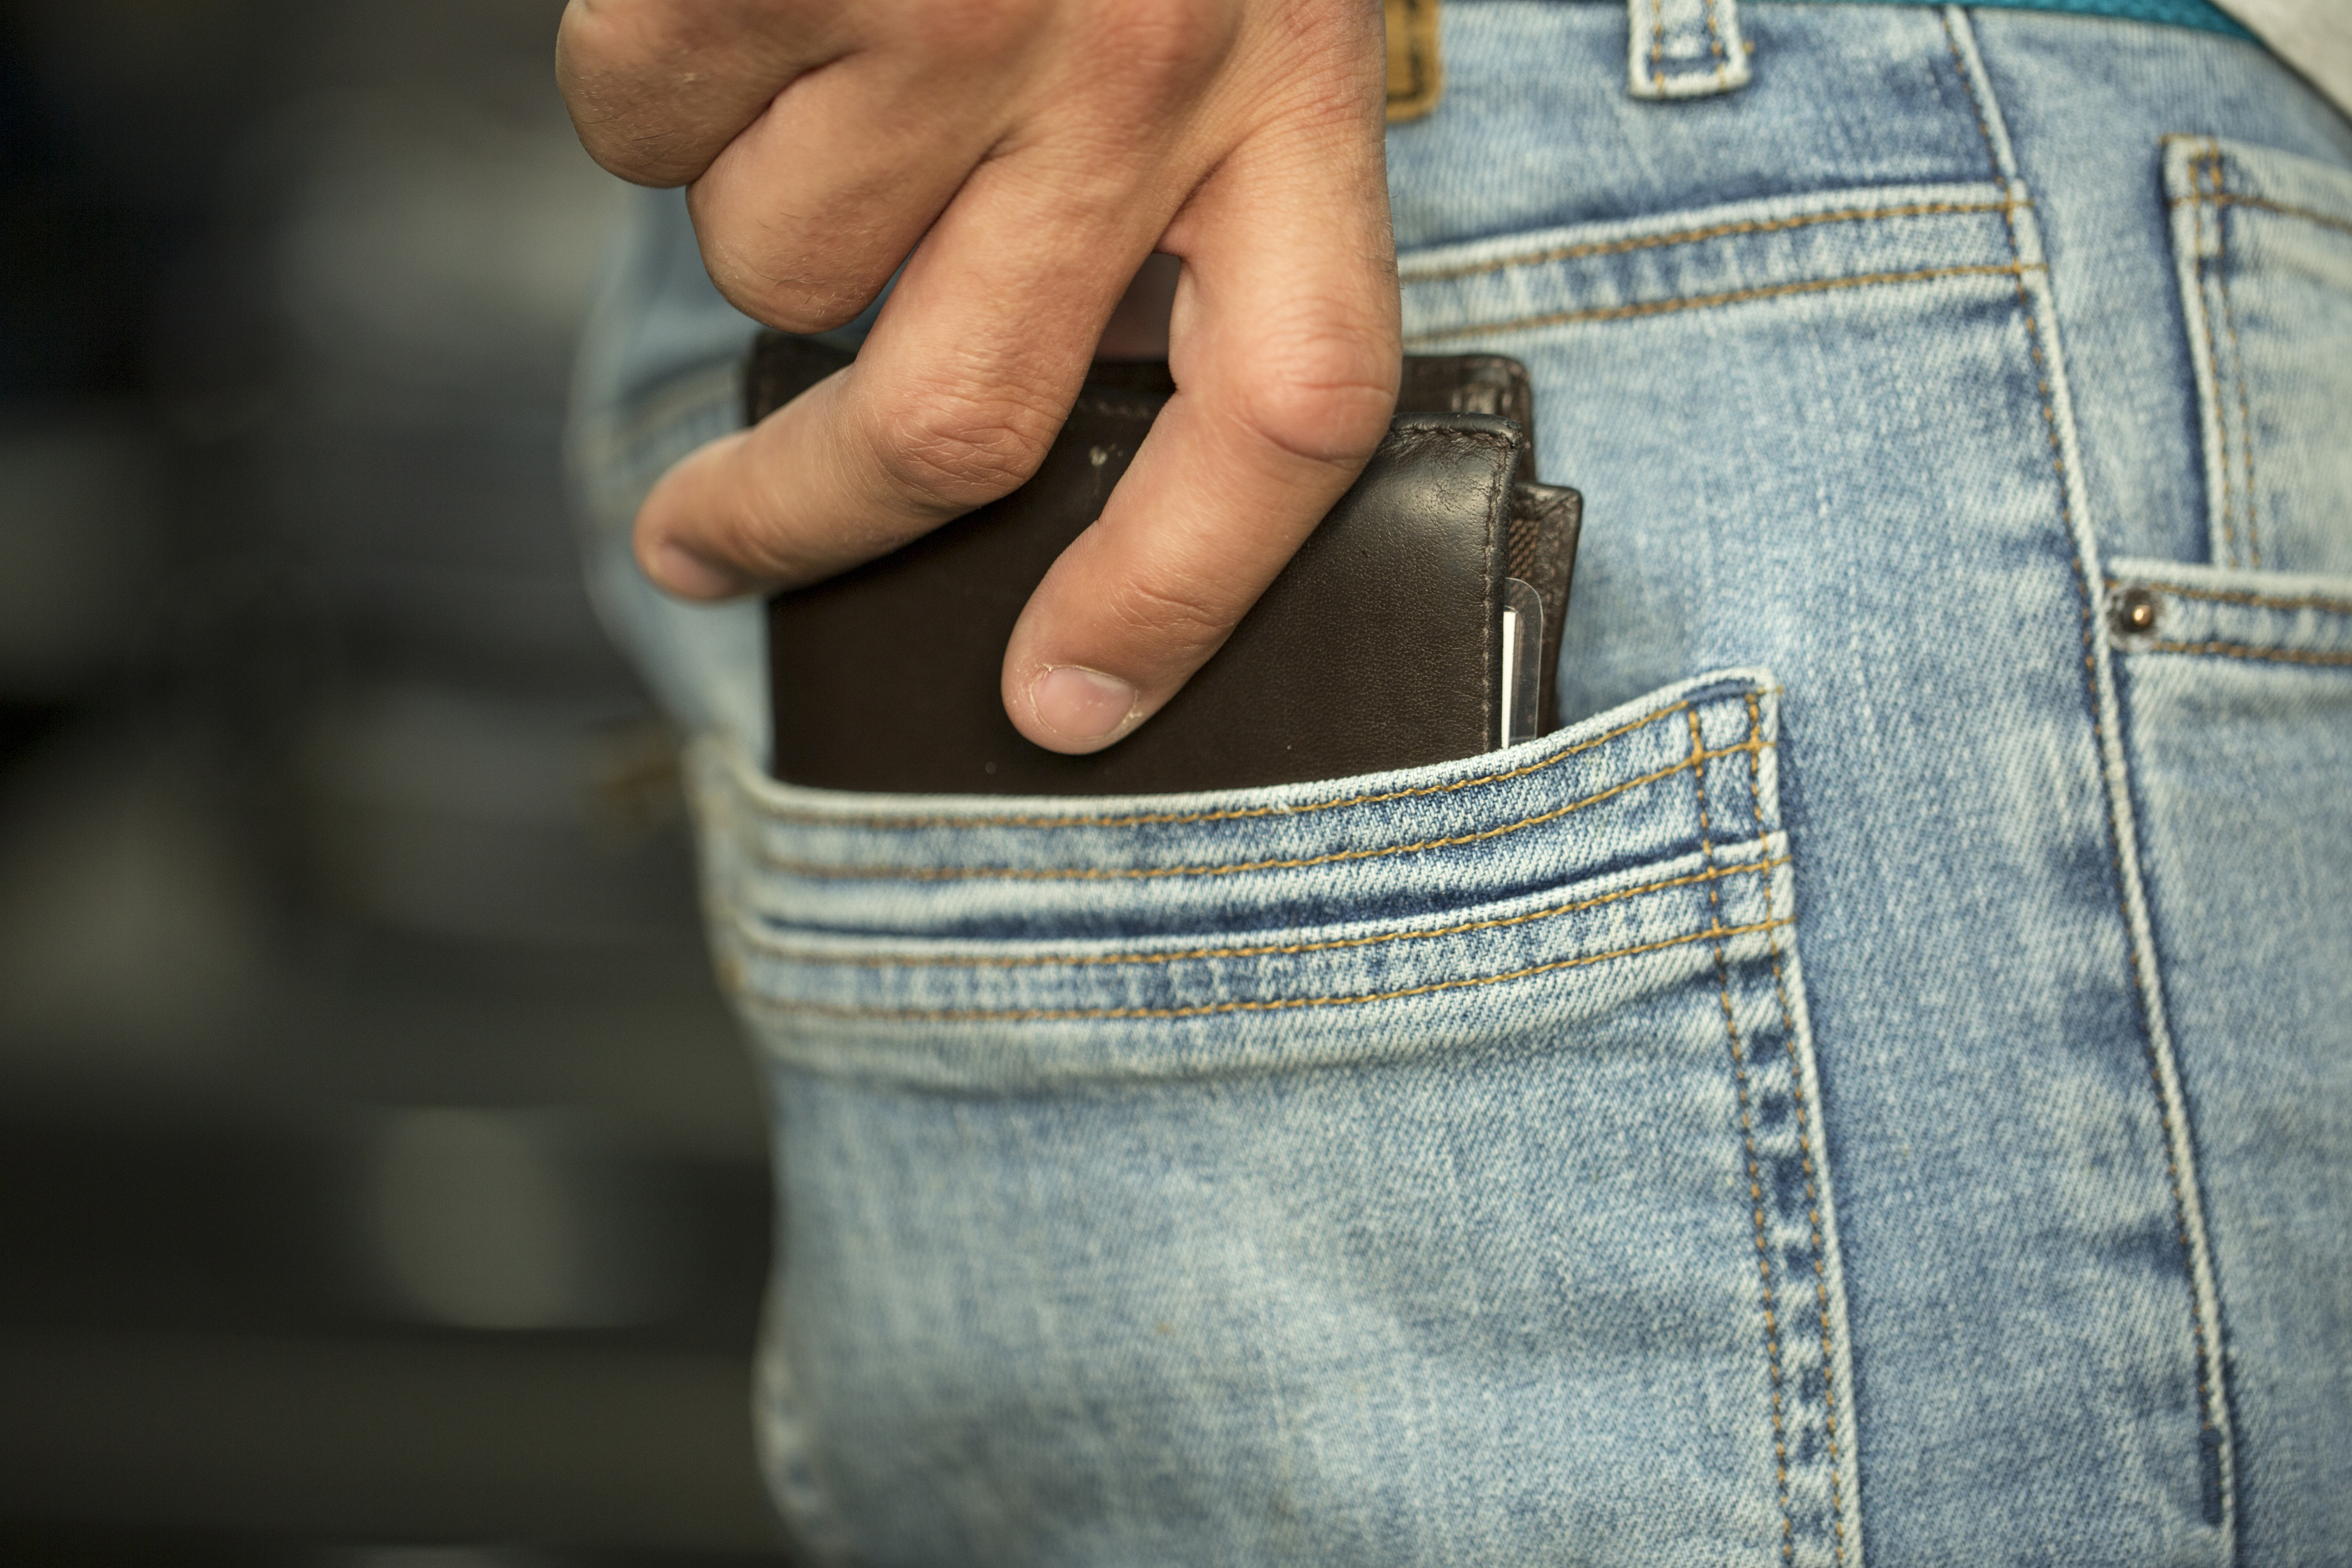 A man taking his wallet and putting it in his back pocket | Source: Shutterstock